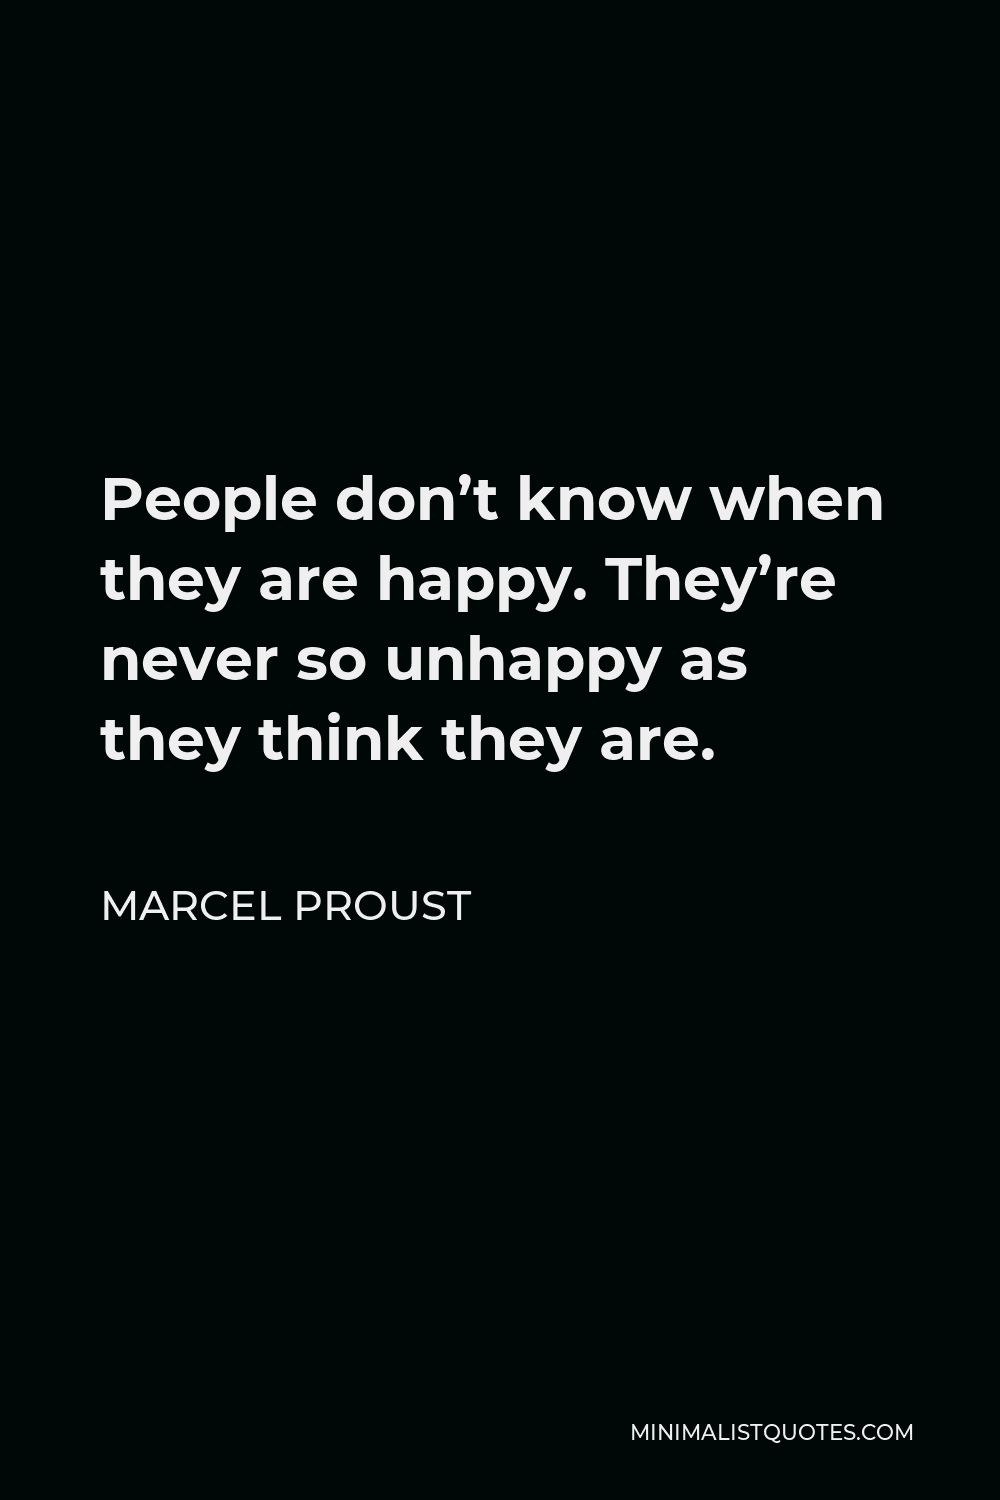 Marcel Proust Quote - People don’t know when they are happy. They’re never so unhappy as they think they are.